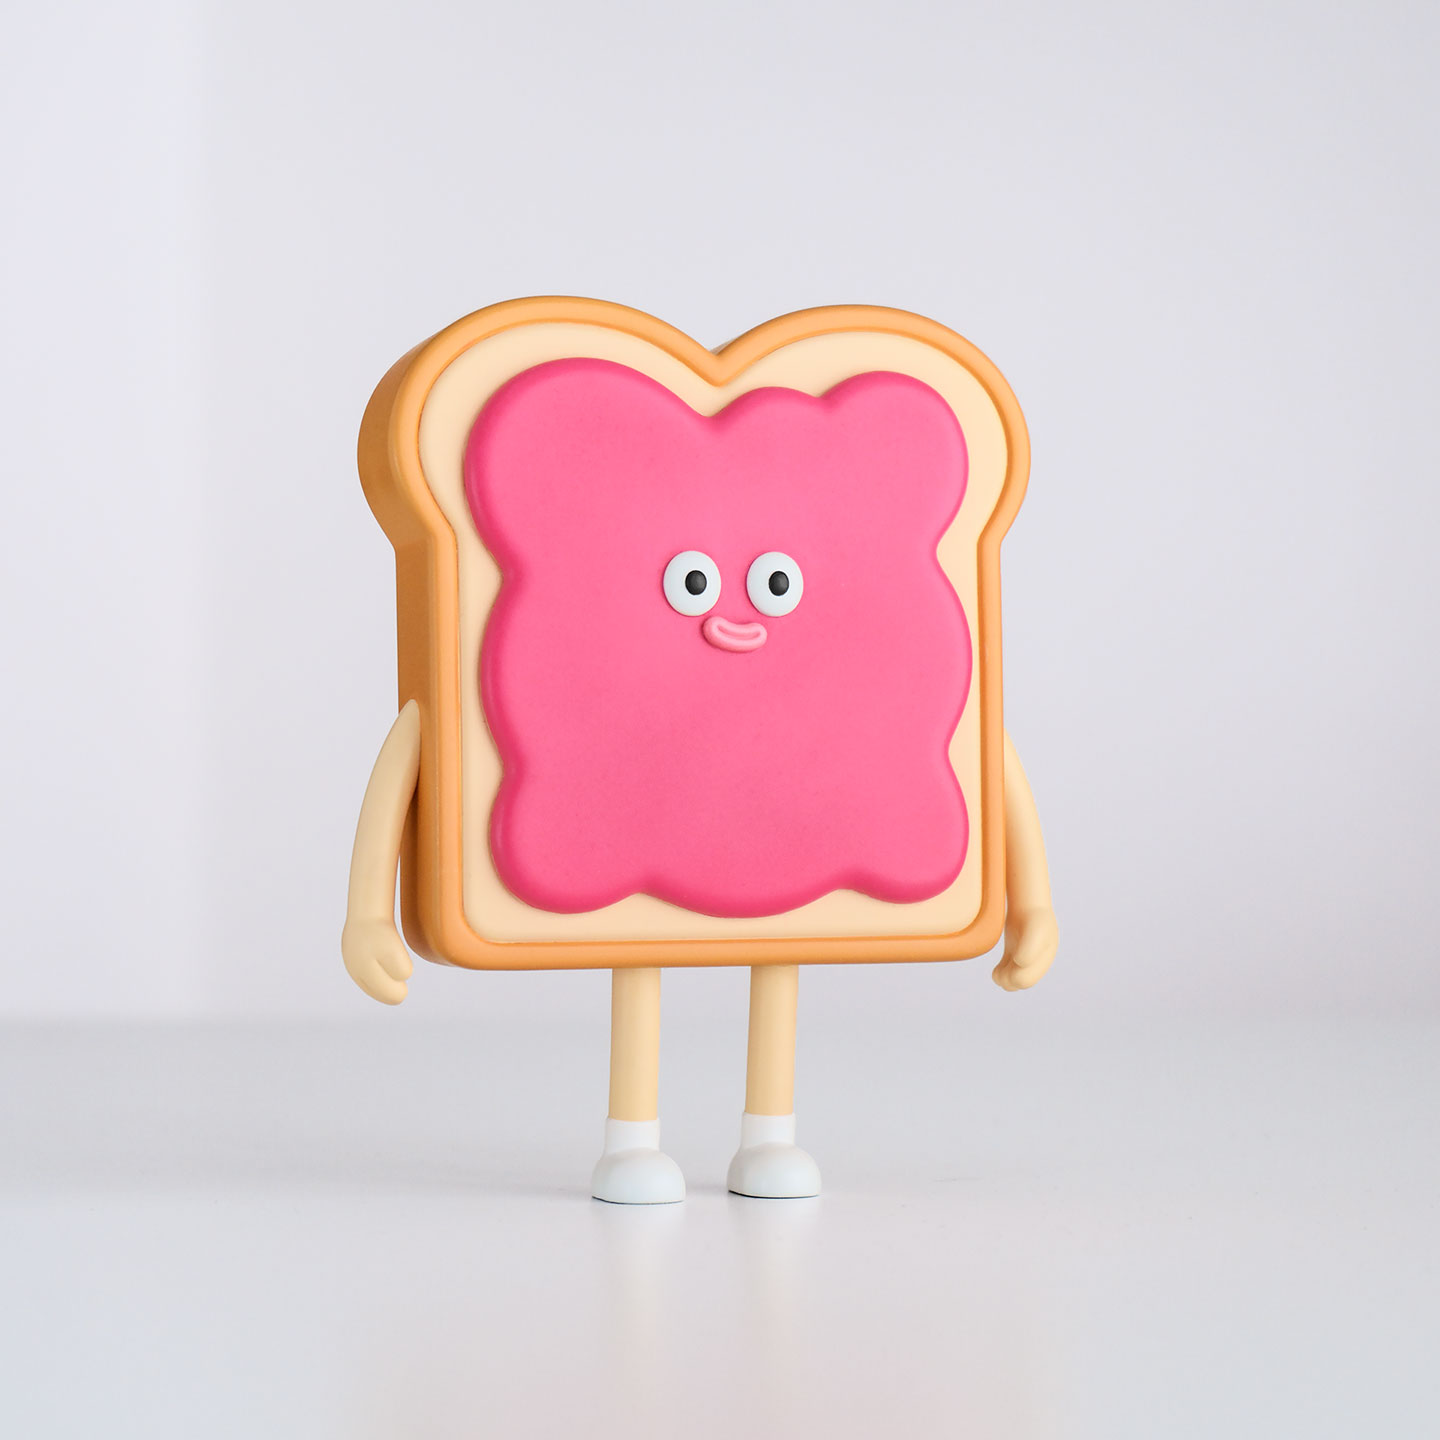 Photo of Toast toy from front view